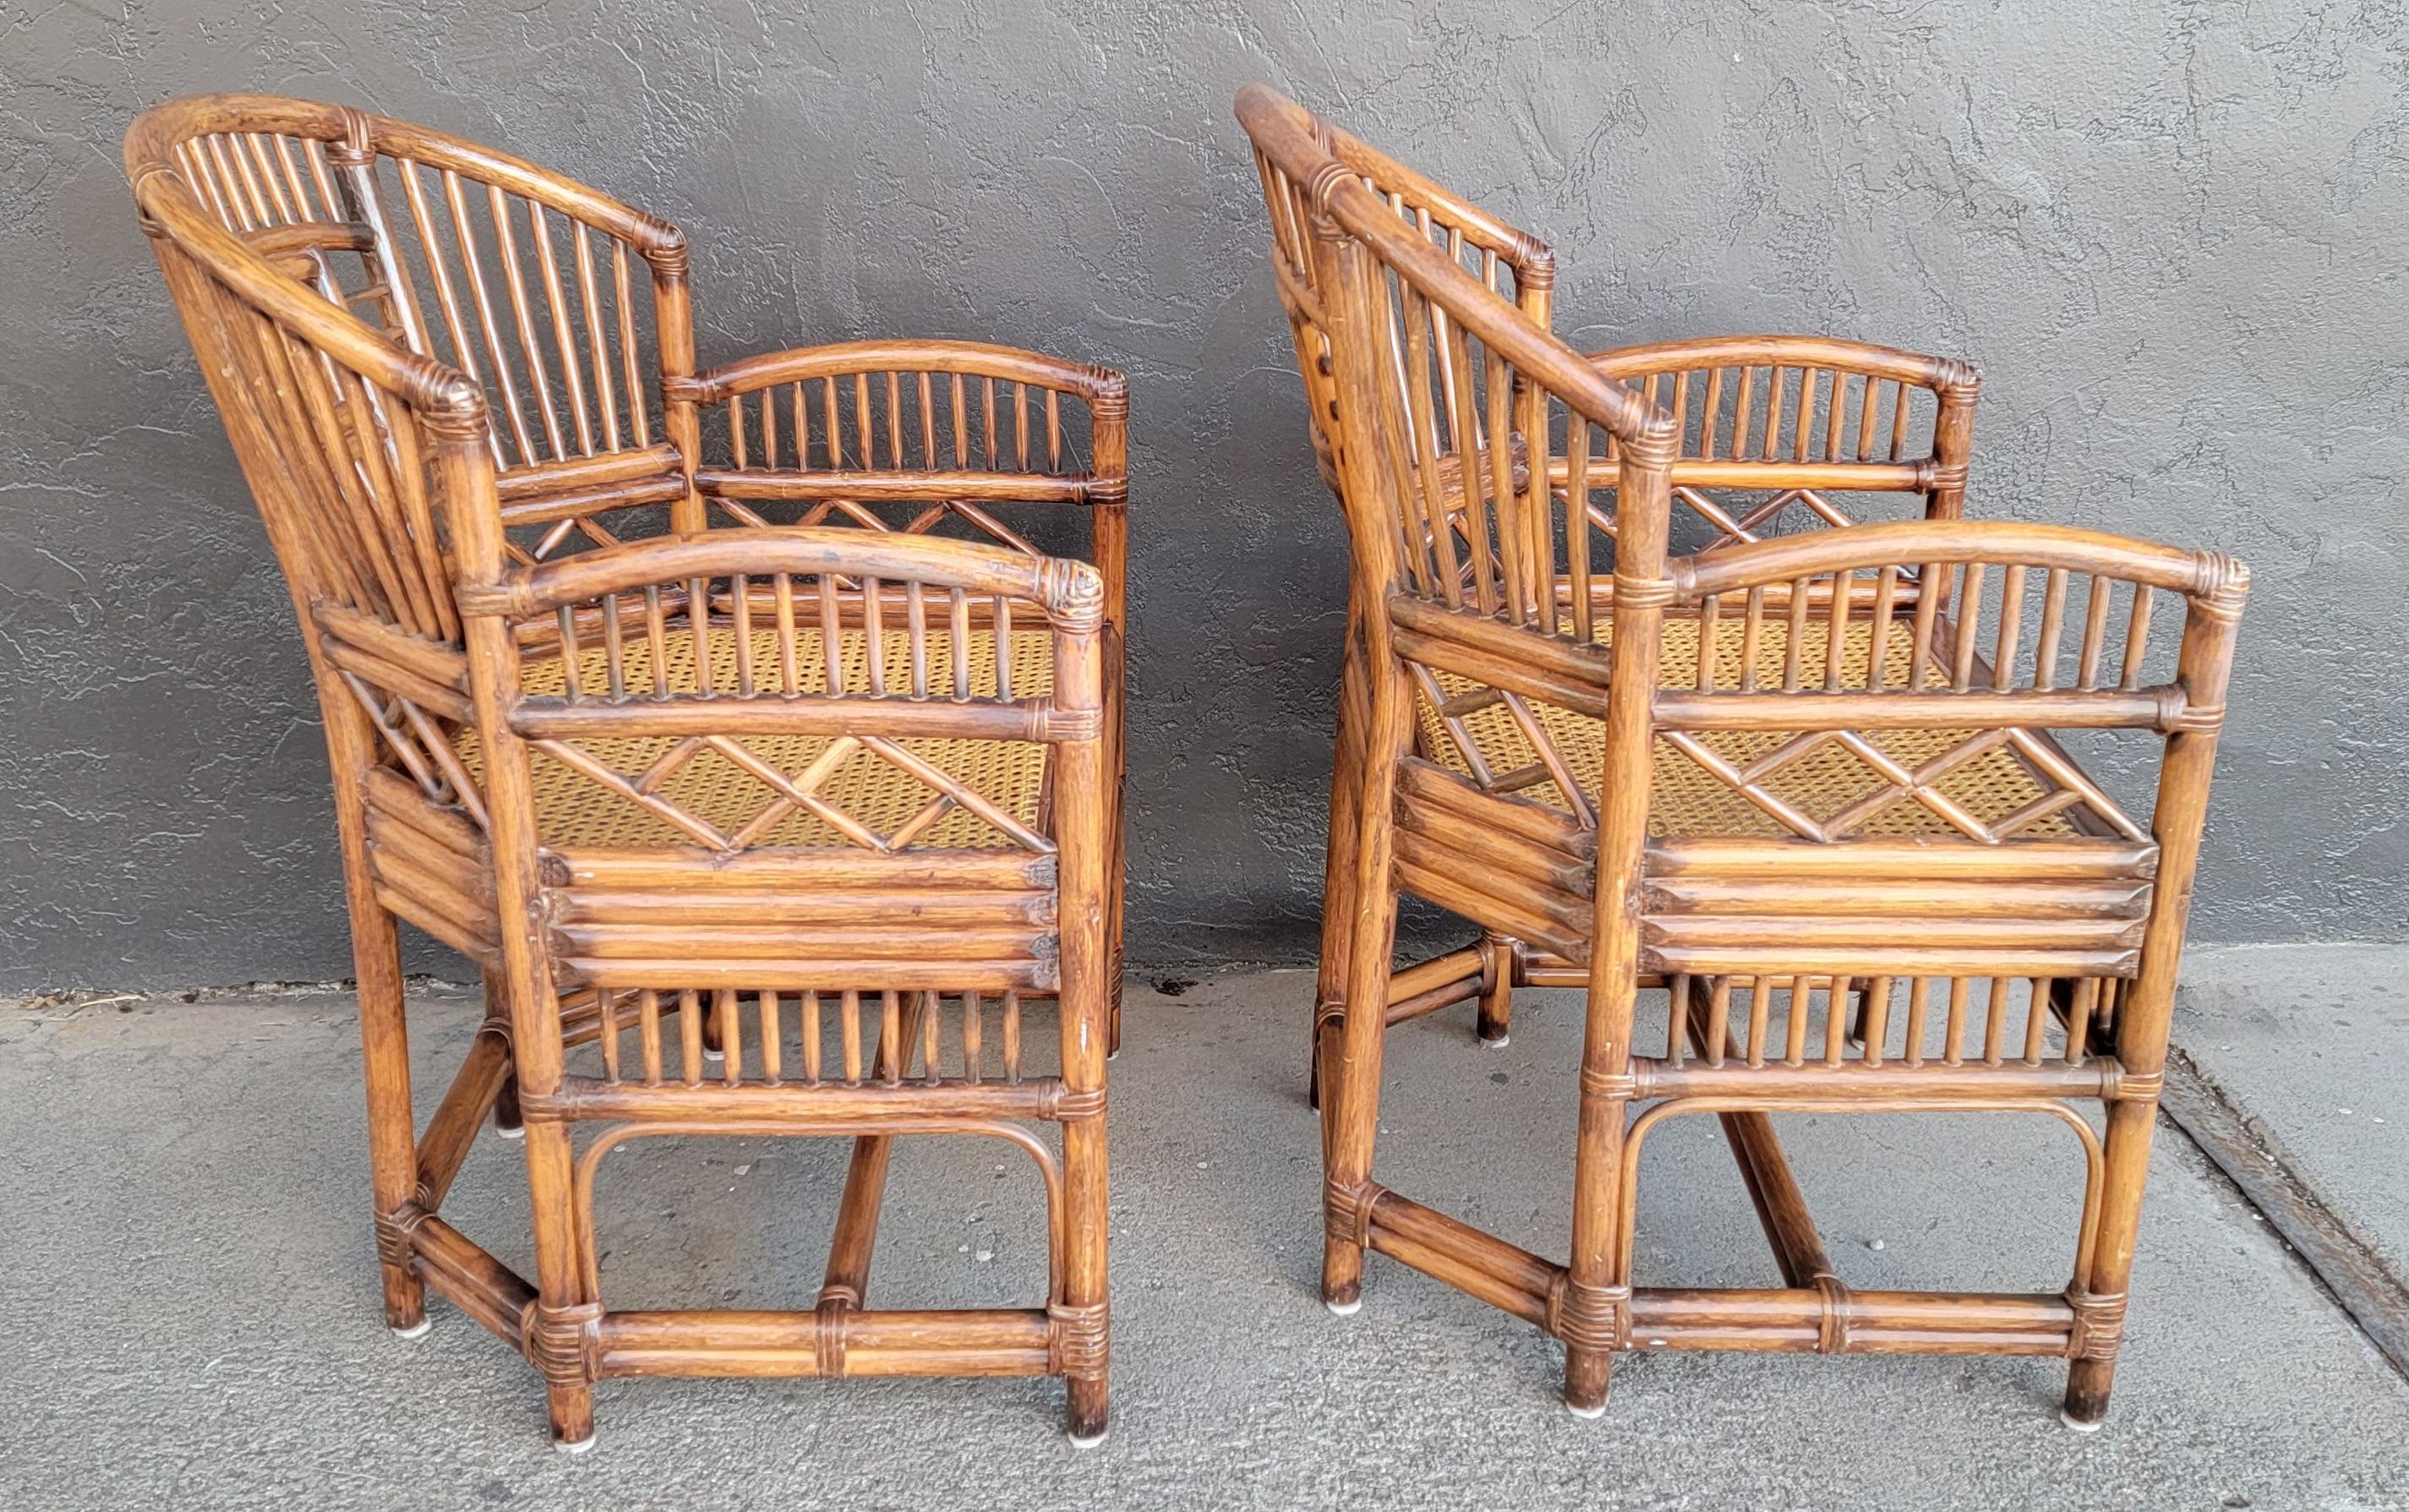 Bamboo Lounge Chairs with Cane Seats 2